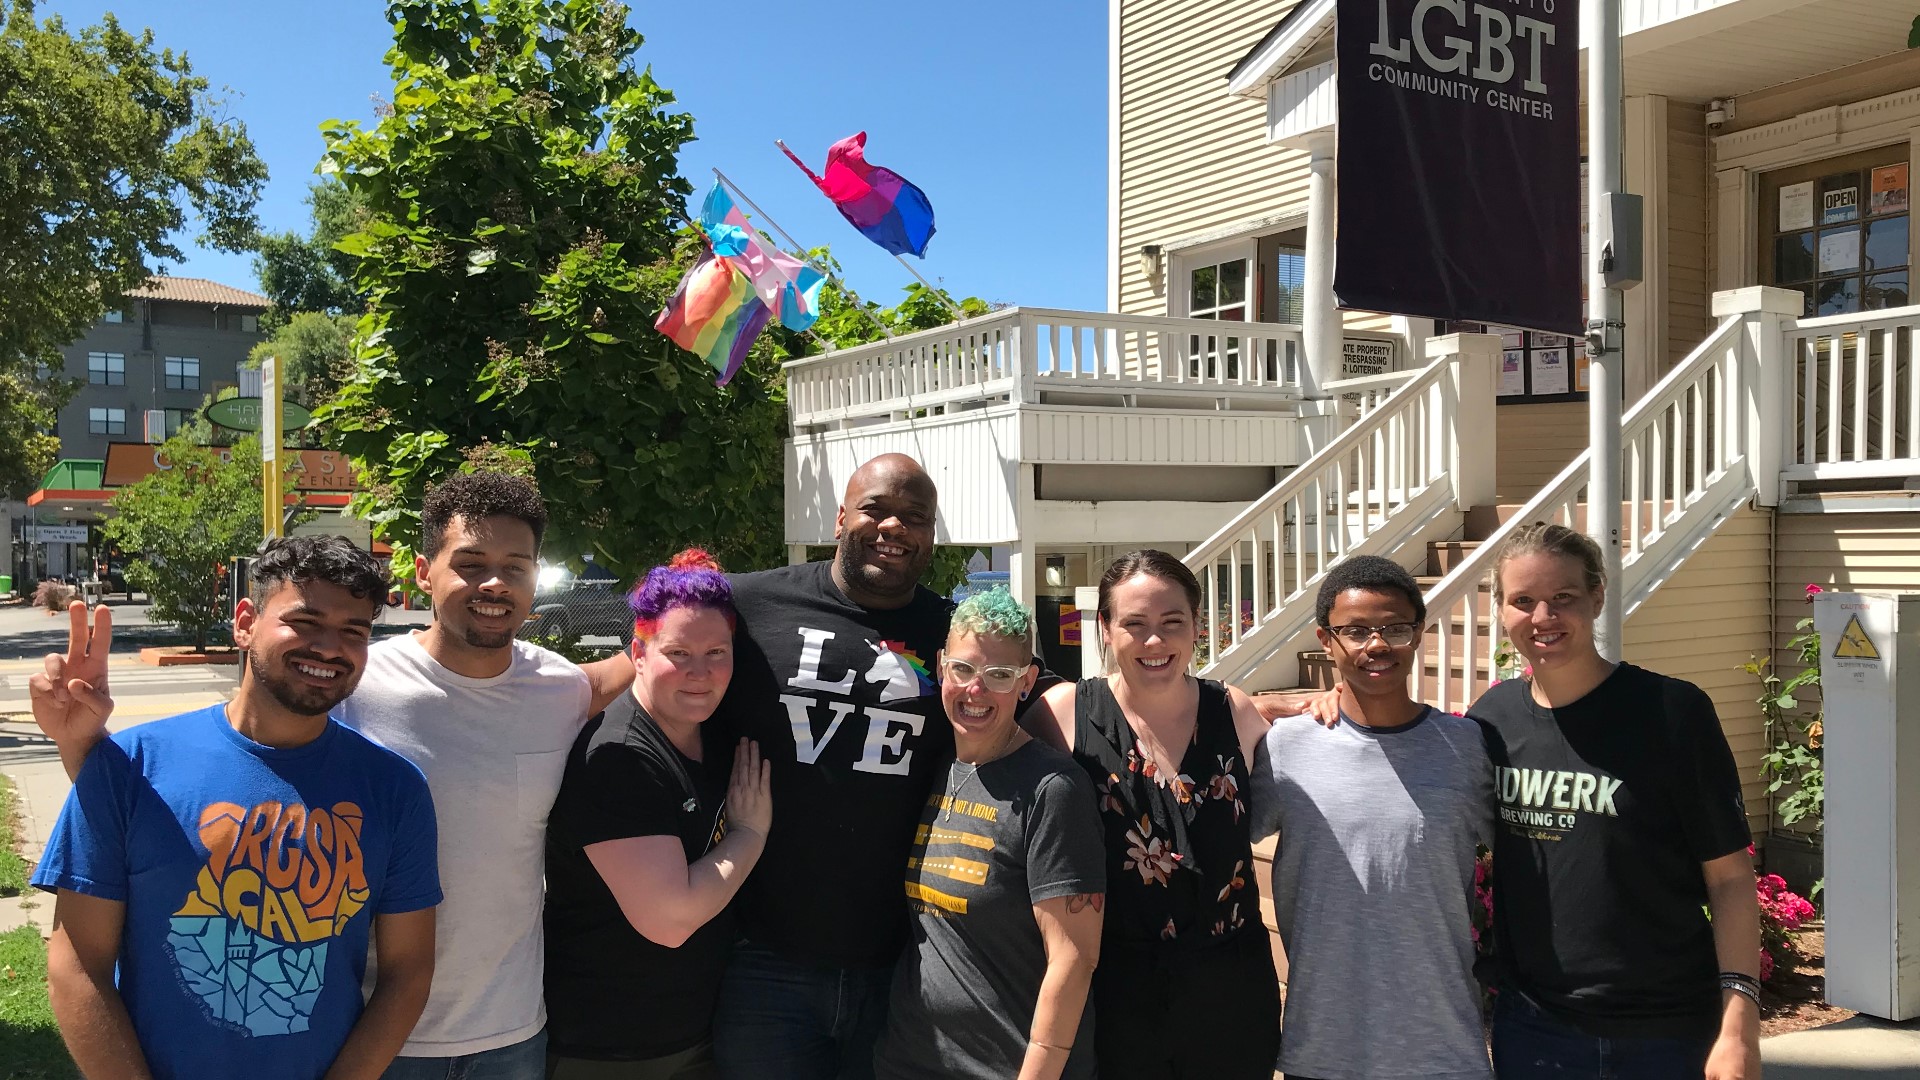 Staff members for the Sacramento LGBT Community Center are encouraging the community to join in peaceful protest by supporting alternative Pride venues.